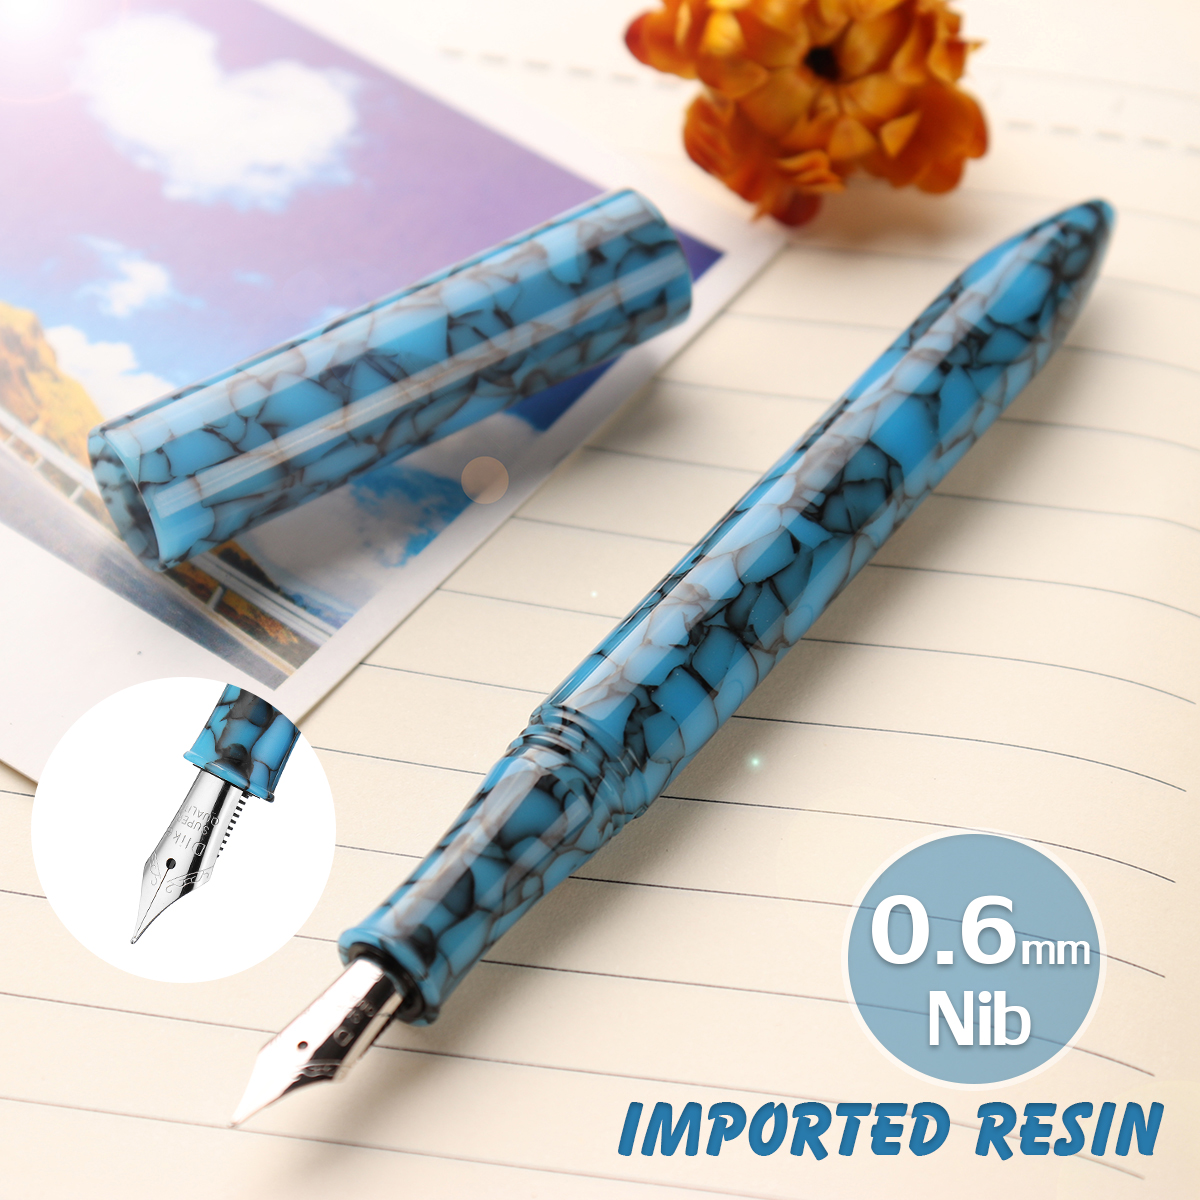 Delike-06mm-Nib-Resin-Fountain-Pen-Rotating-Ink-Calligraphy-Writing-With-Box-For-Office-School-1303281-2